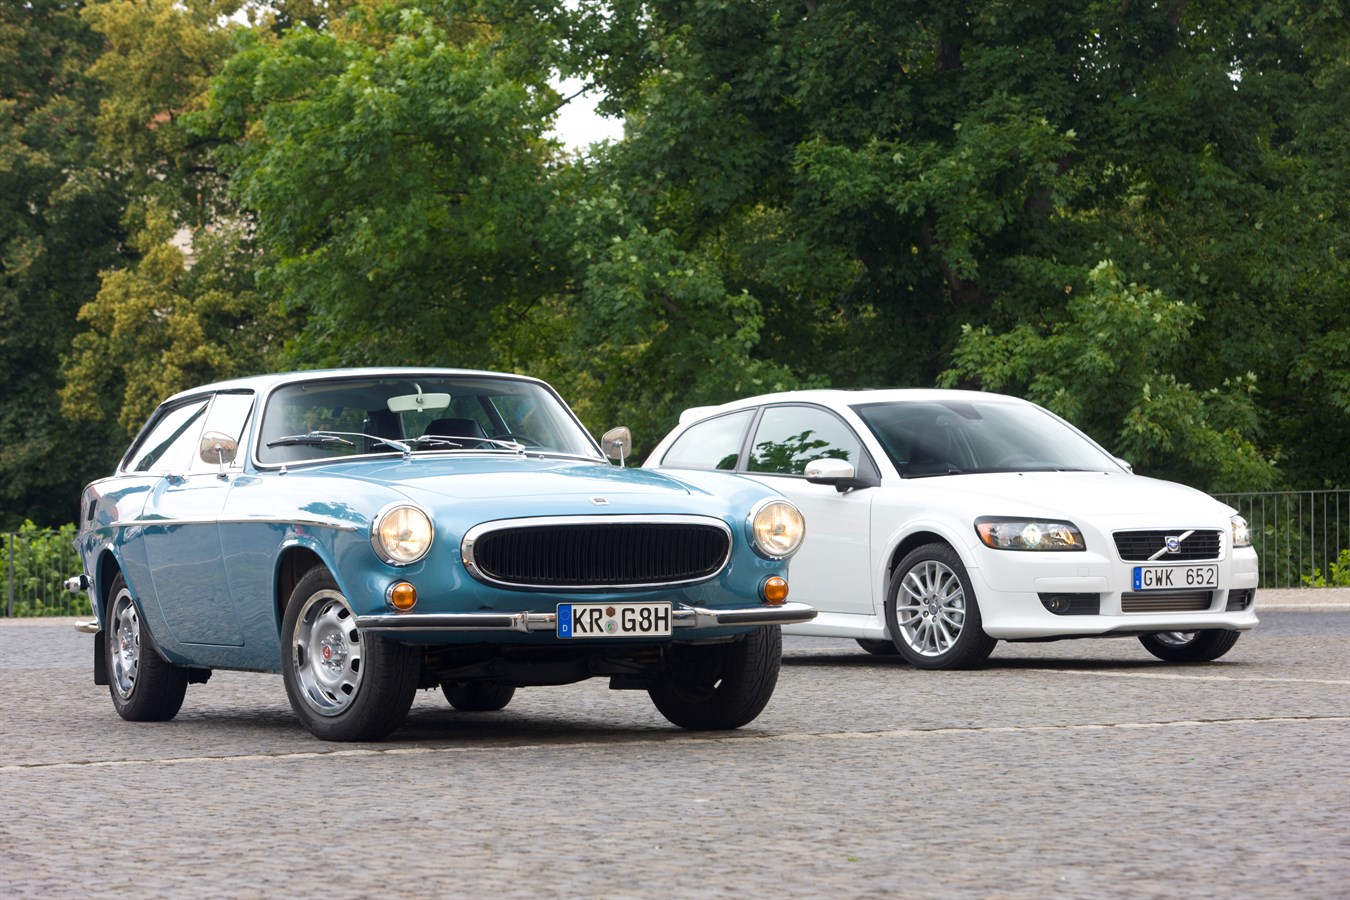 Volvo Cars celebrates 50 years in Germany